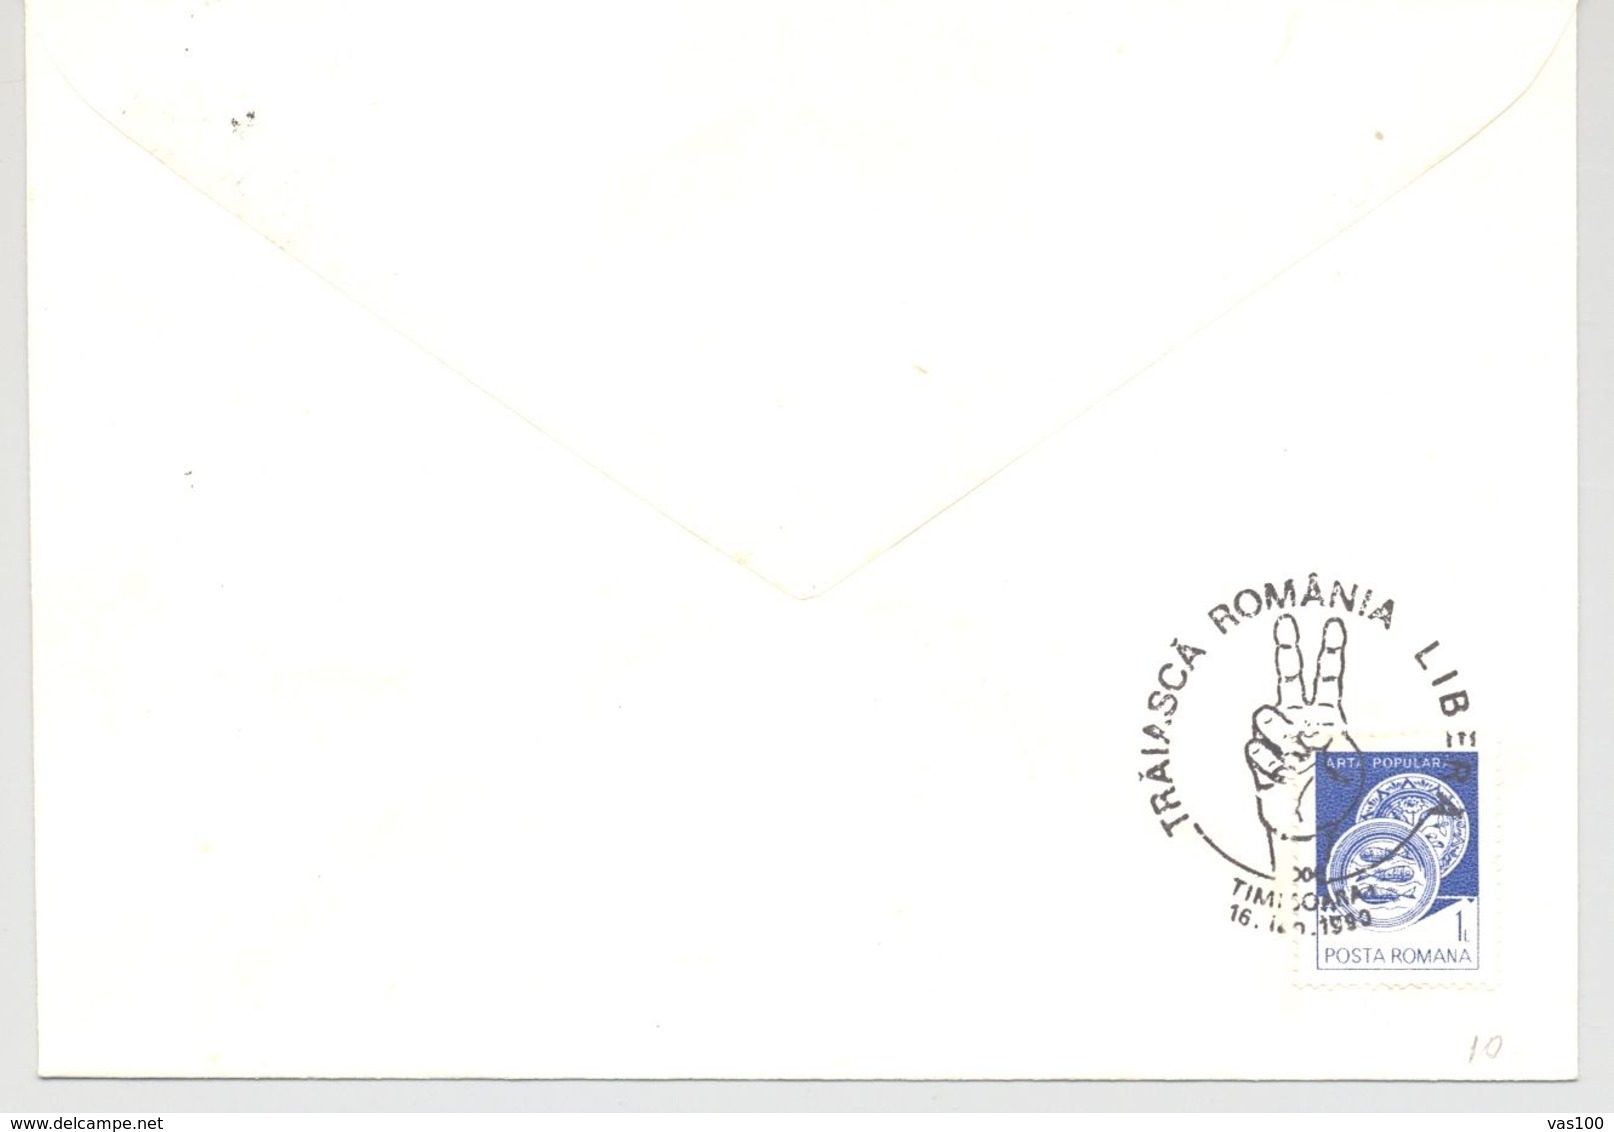 LONG LIVE FREE ROMANIA, 1989 REVOLUTION SPECIAL POSTMARK, FLAG STAMP ON COVER, 1990, ROMANIA - Covers & Documents